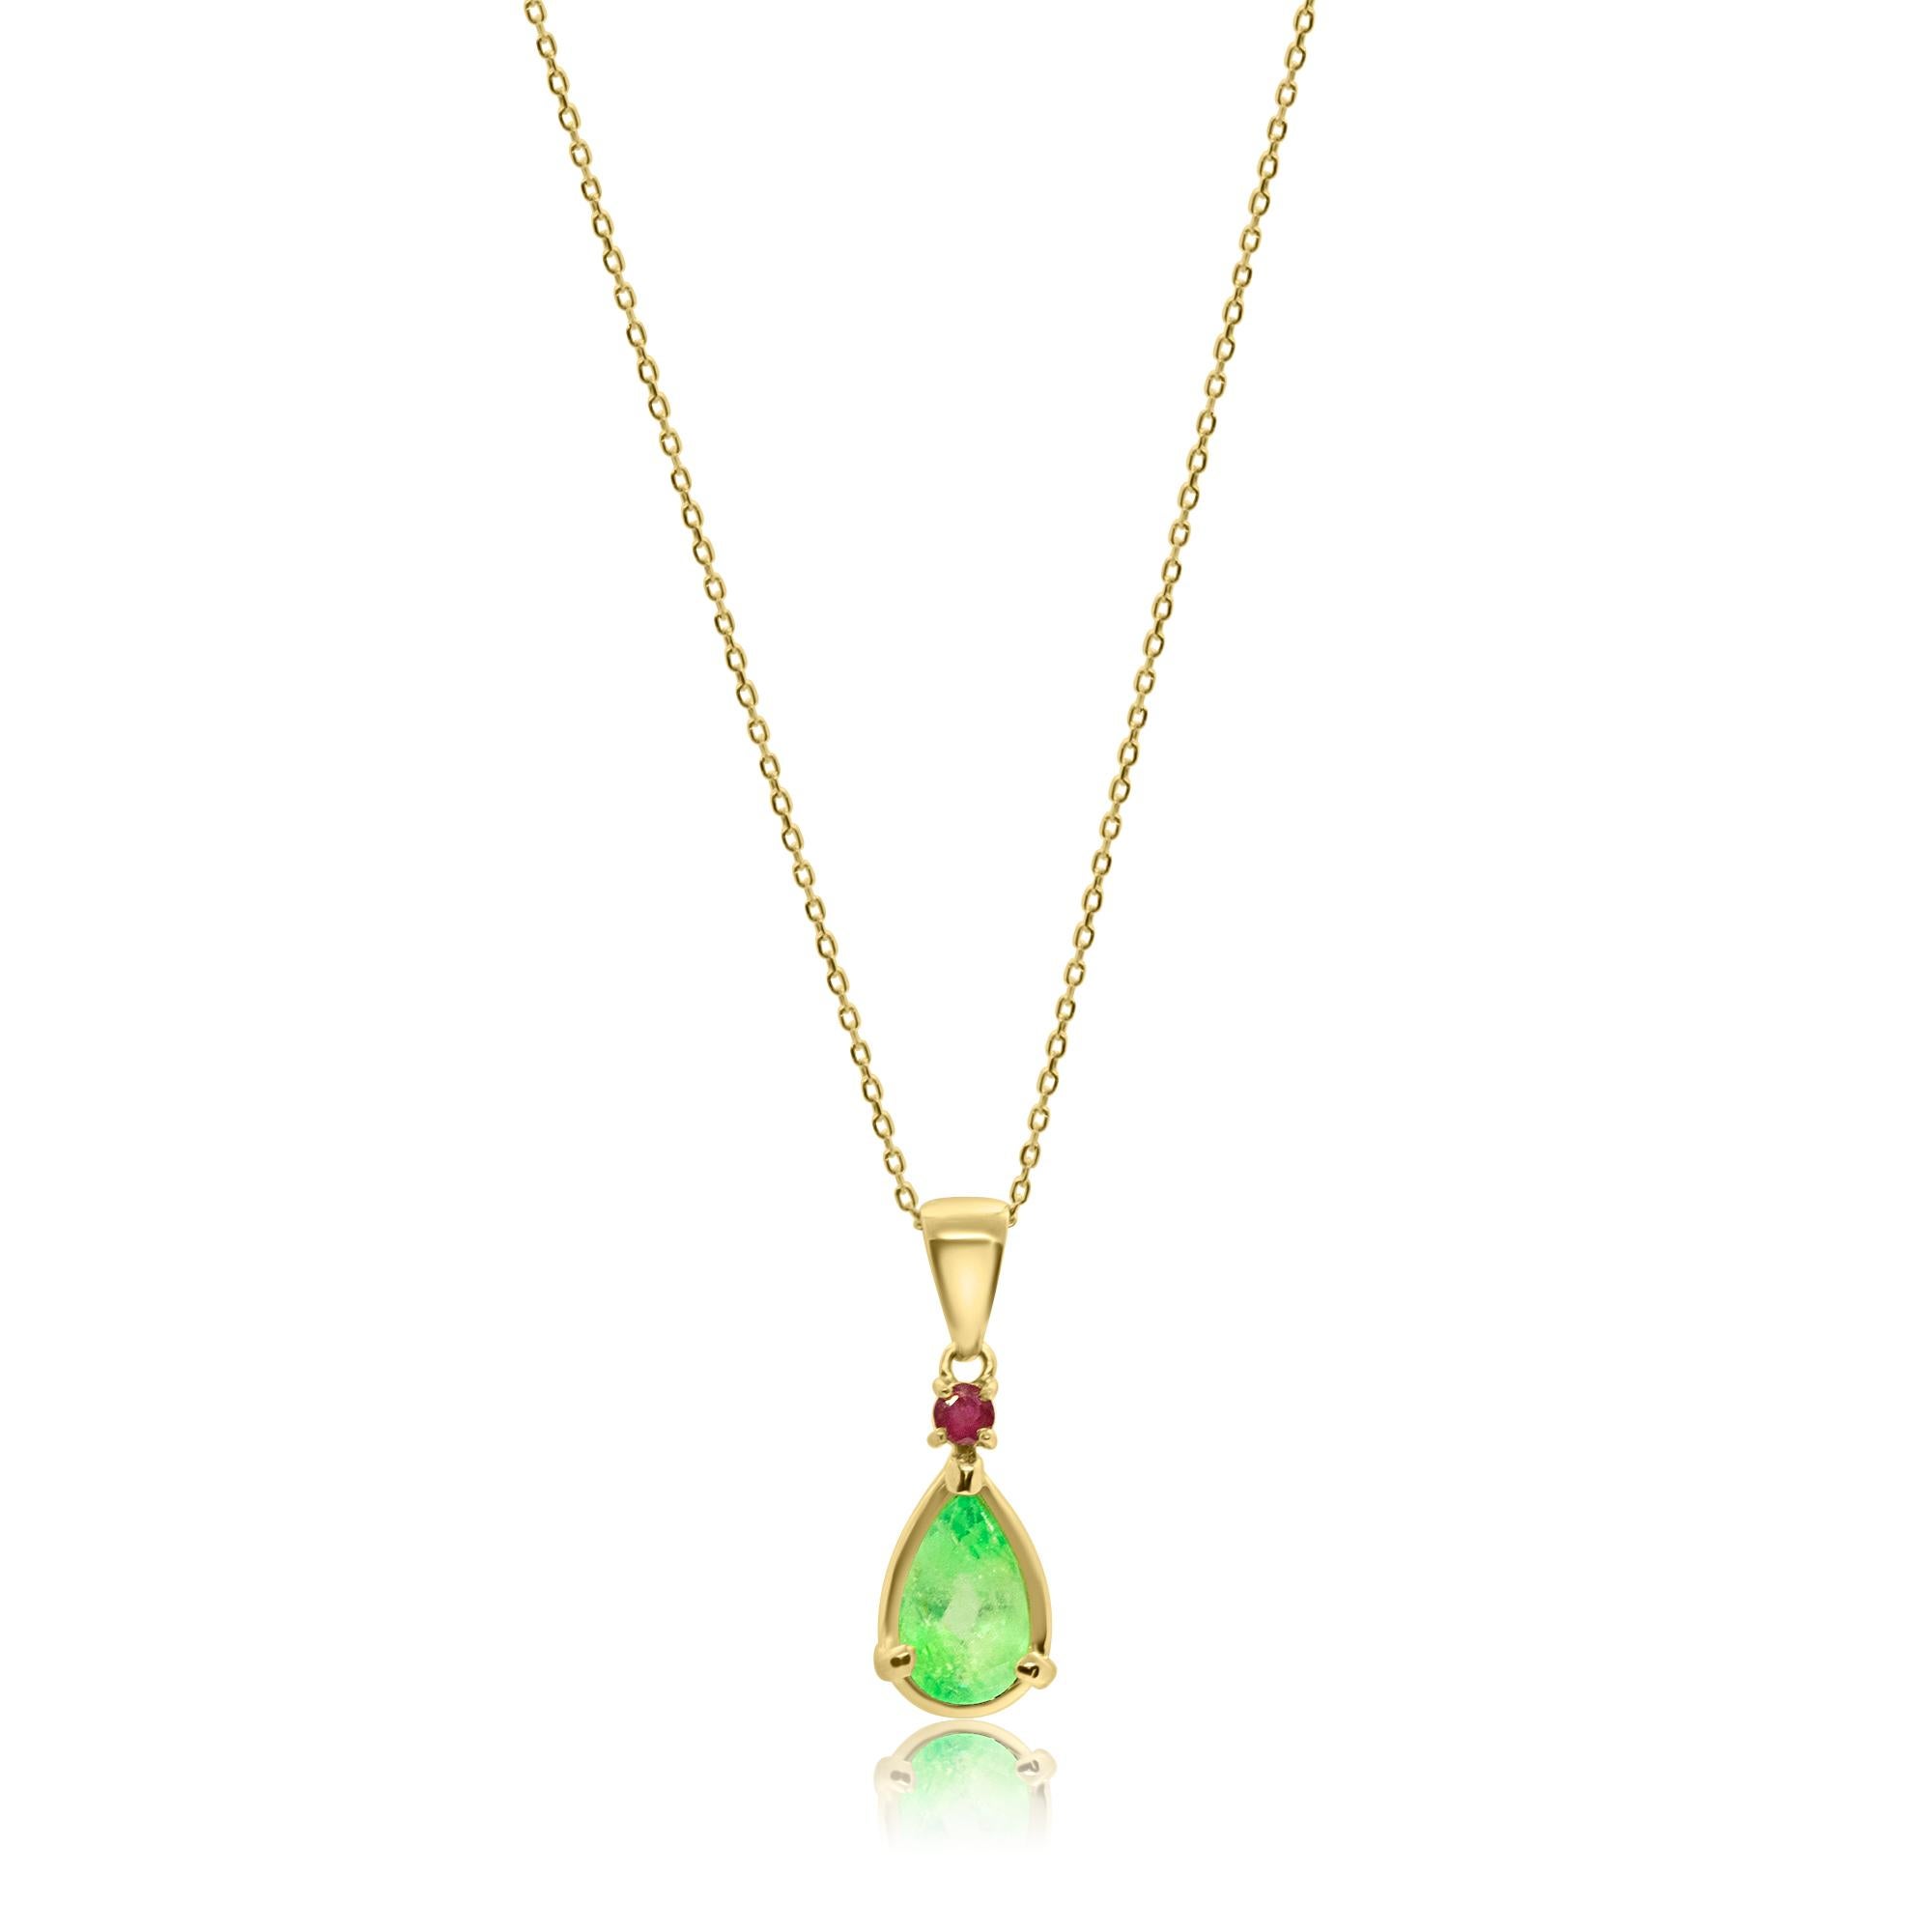 Cocktail jewellery in 18 karat yellow gold, featuring a stunning Colombian Natural Emerald and Precious Ruby. The perfect handmade jewellery for an unforgettable cocktail night.
 
A luxurious and unique pendant necklace, featuring rare and precious